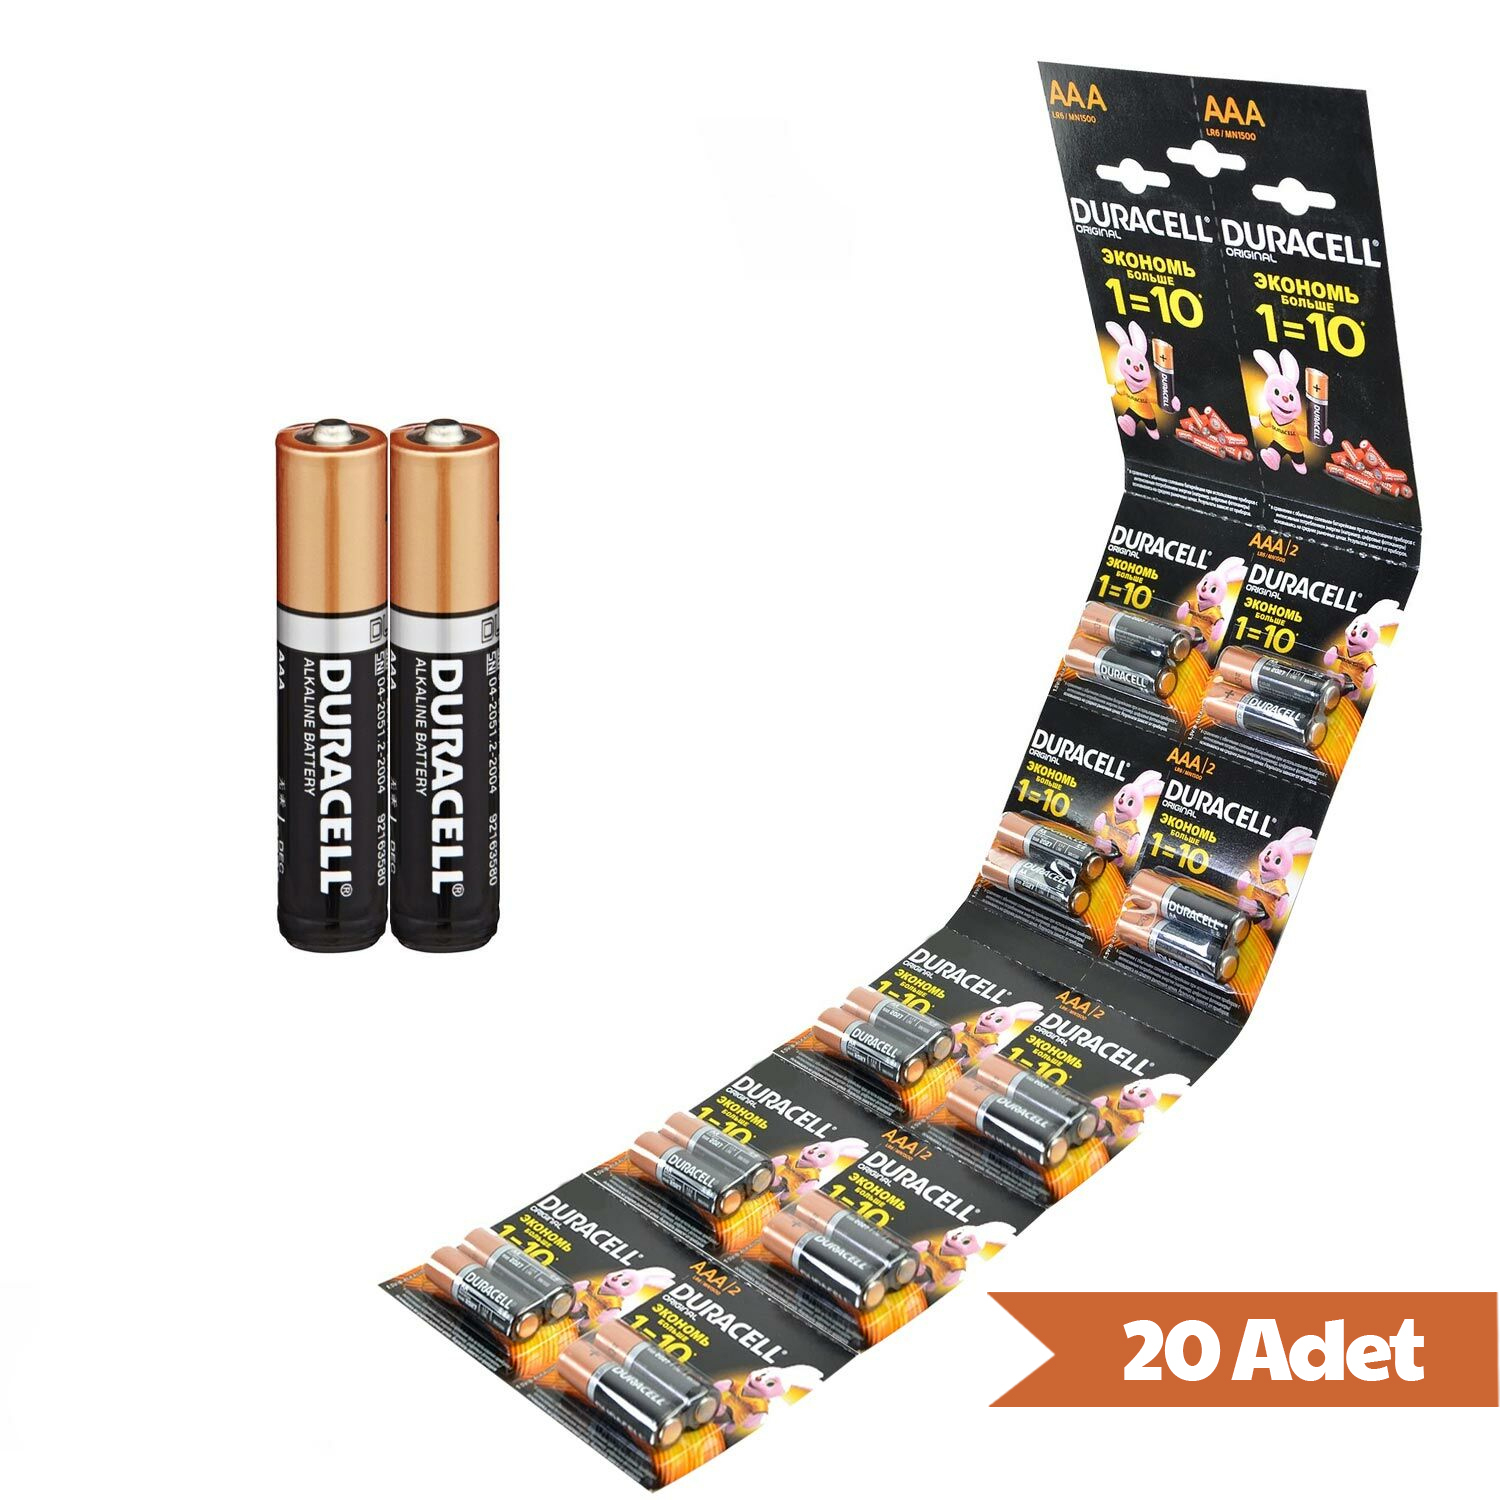 20 Adet - Duracell Simply, İnce Pil, Alkaline AAA